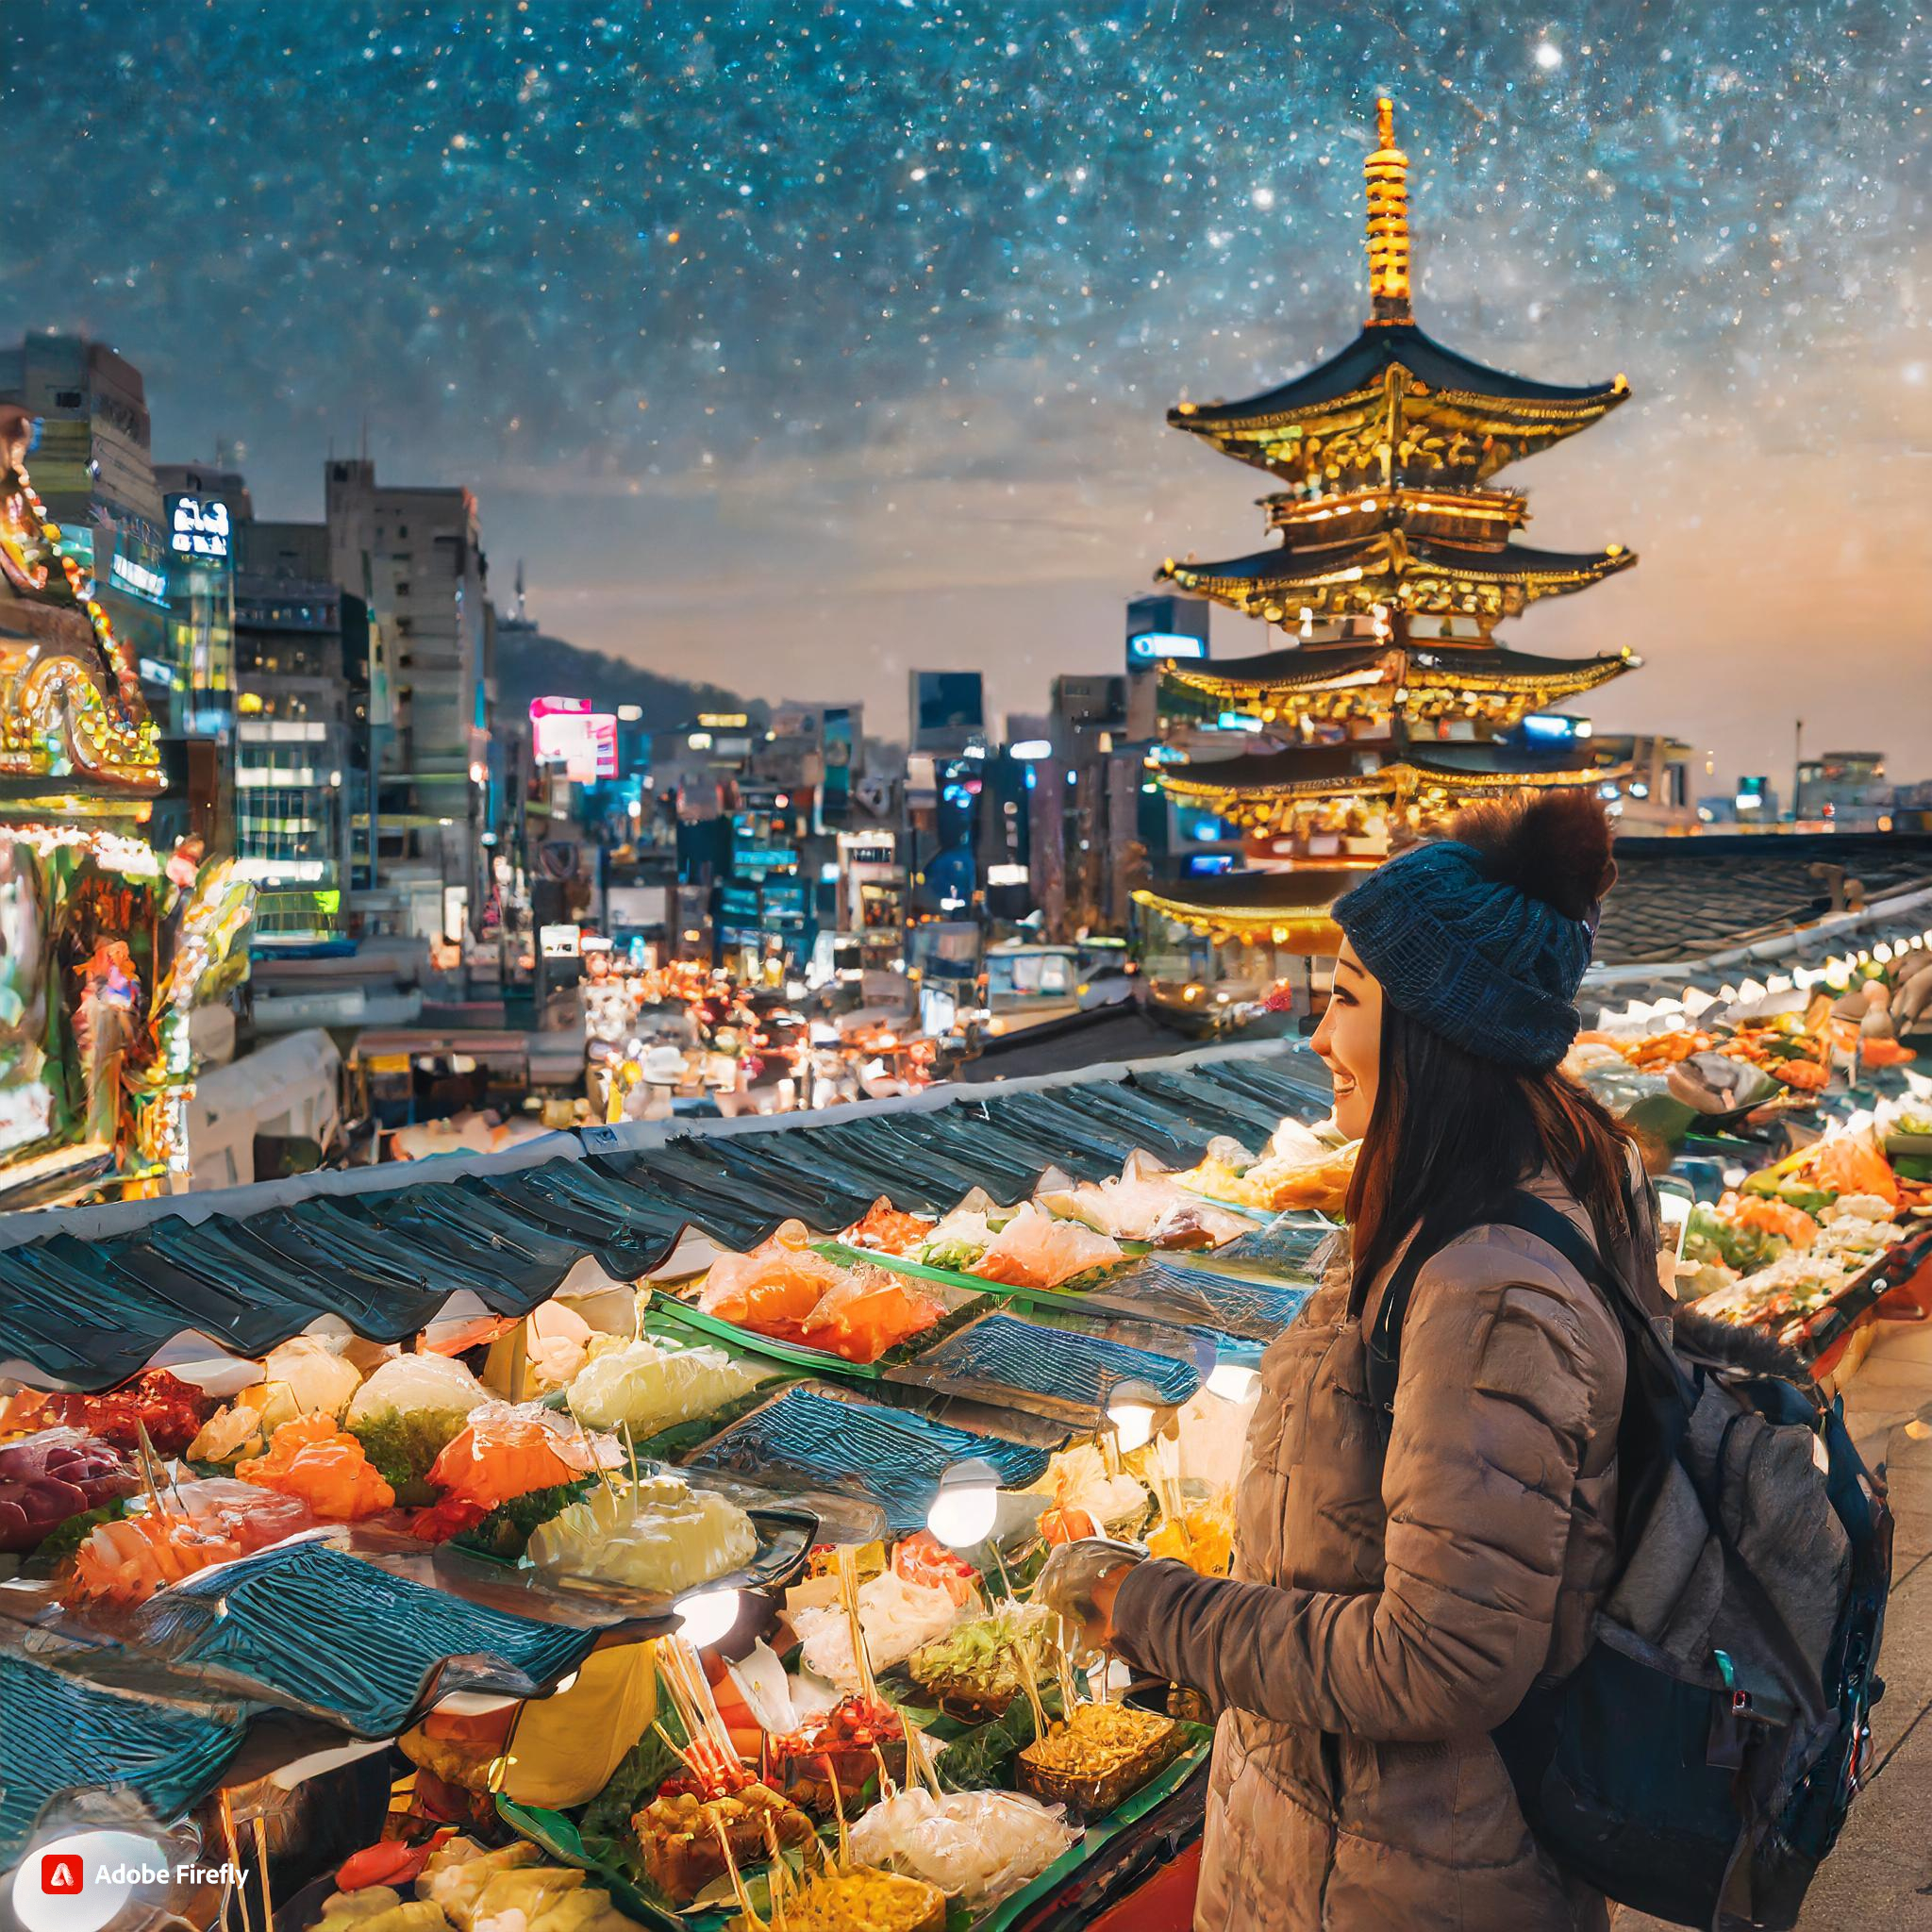 Firefly Showcase the city light in Seoul, Korea with tourist attractions, include the busy markets a